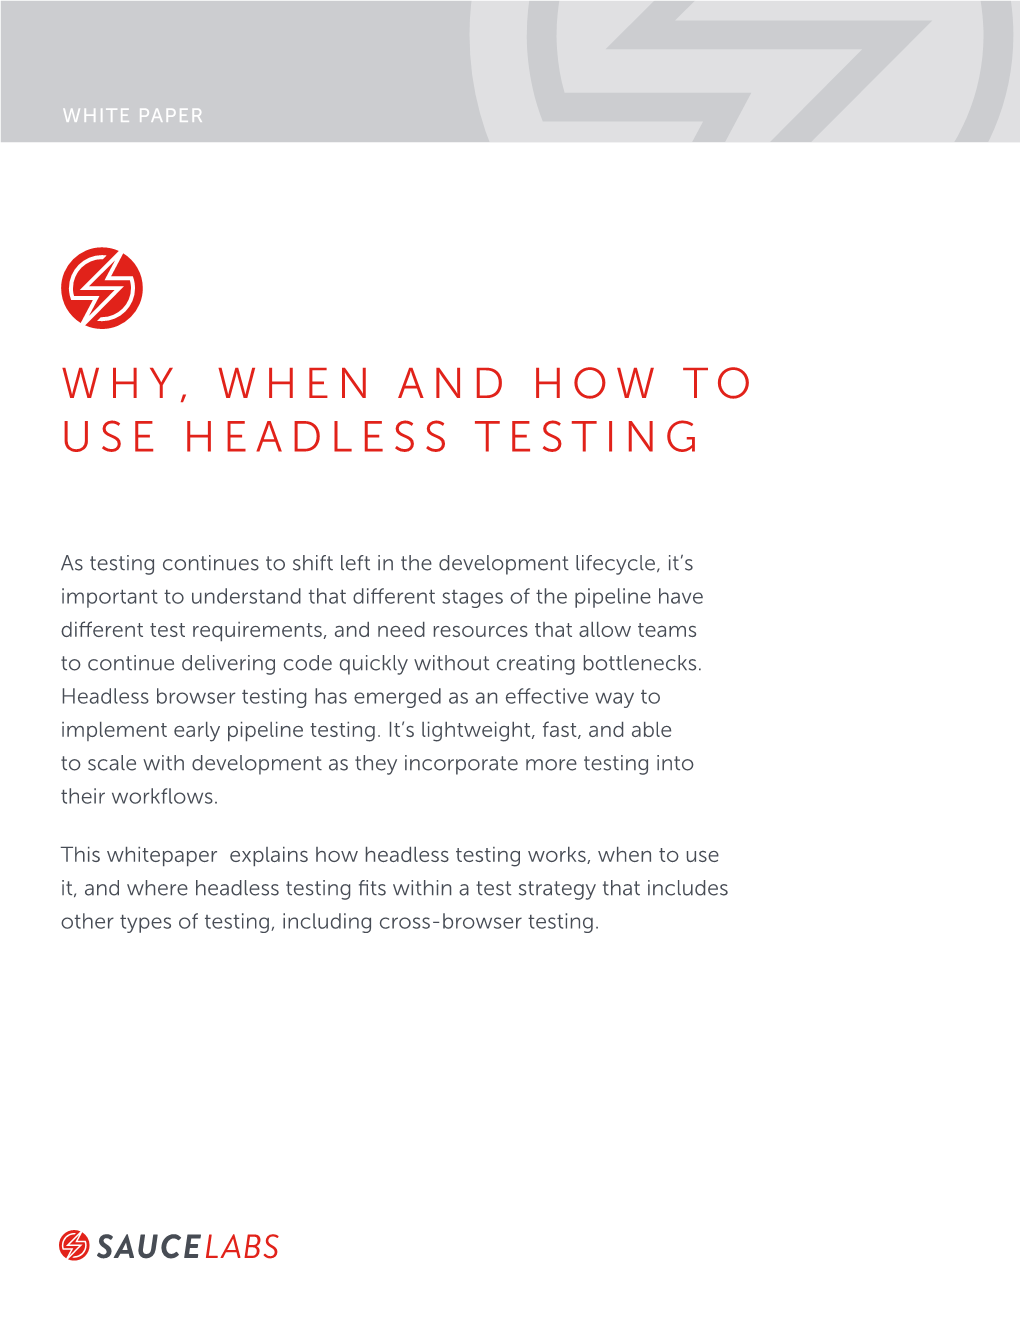 Why, When and How to Use Headless Testing